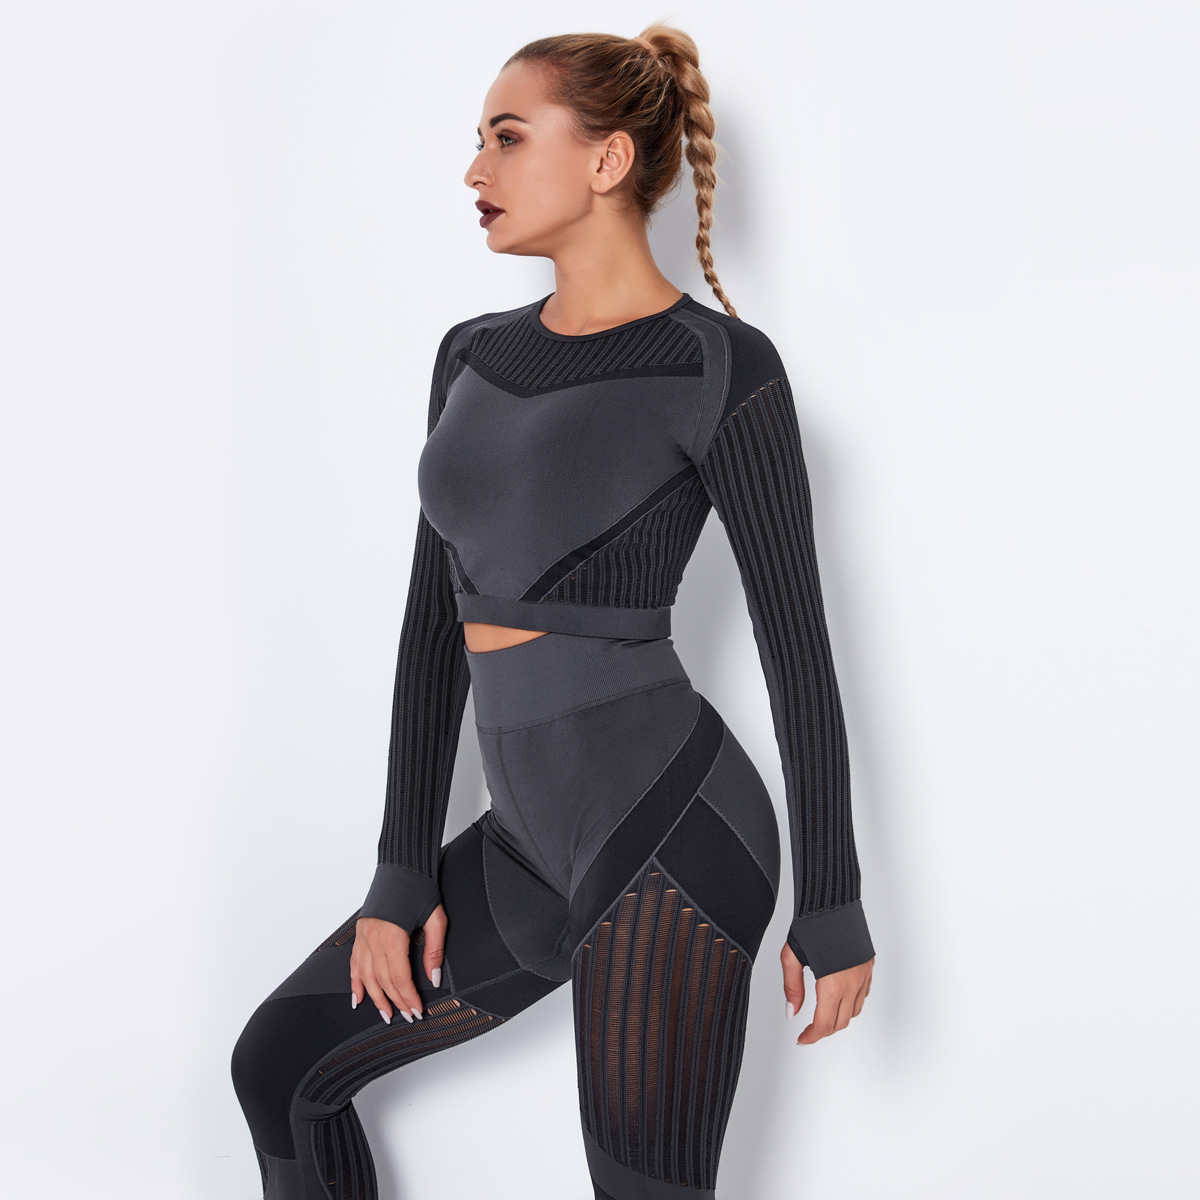 tight-fitting hollow quick-drying seamless fitness long sleeves jacket  NSNS11037